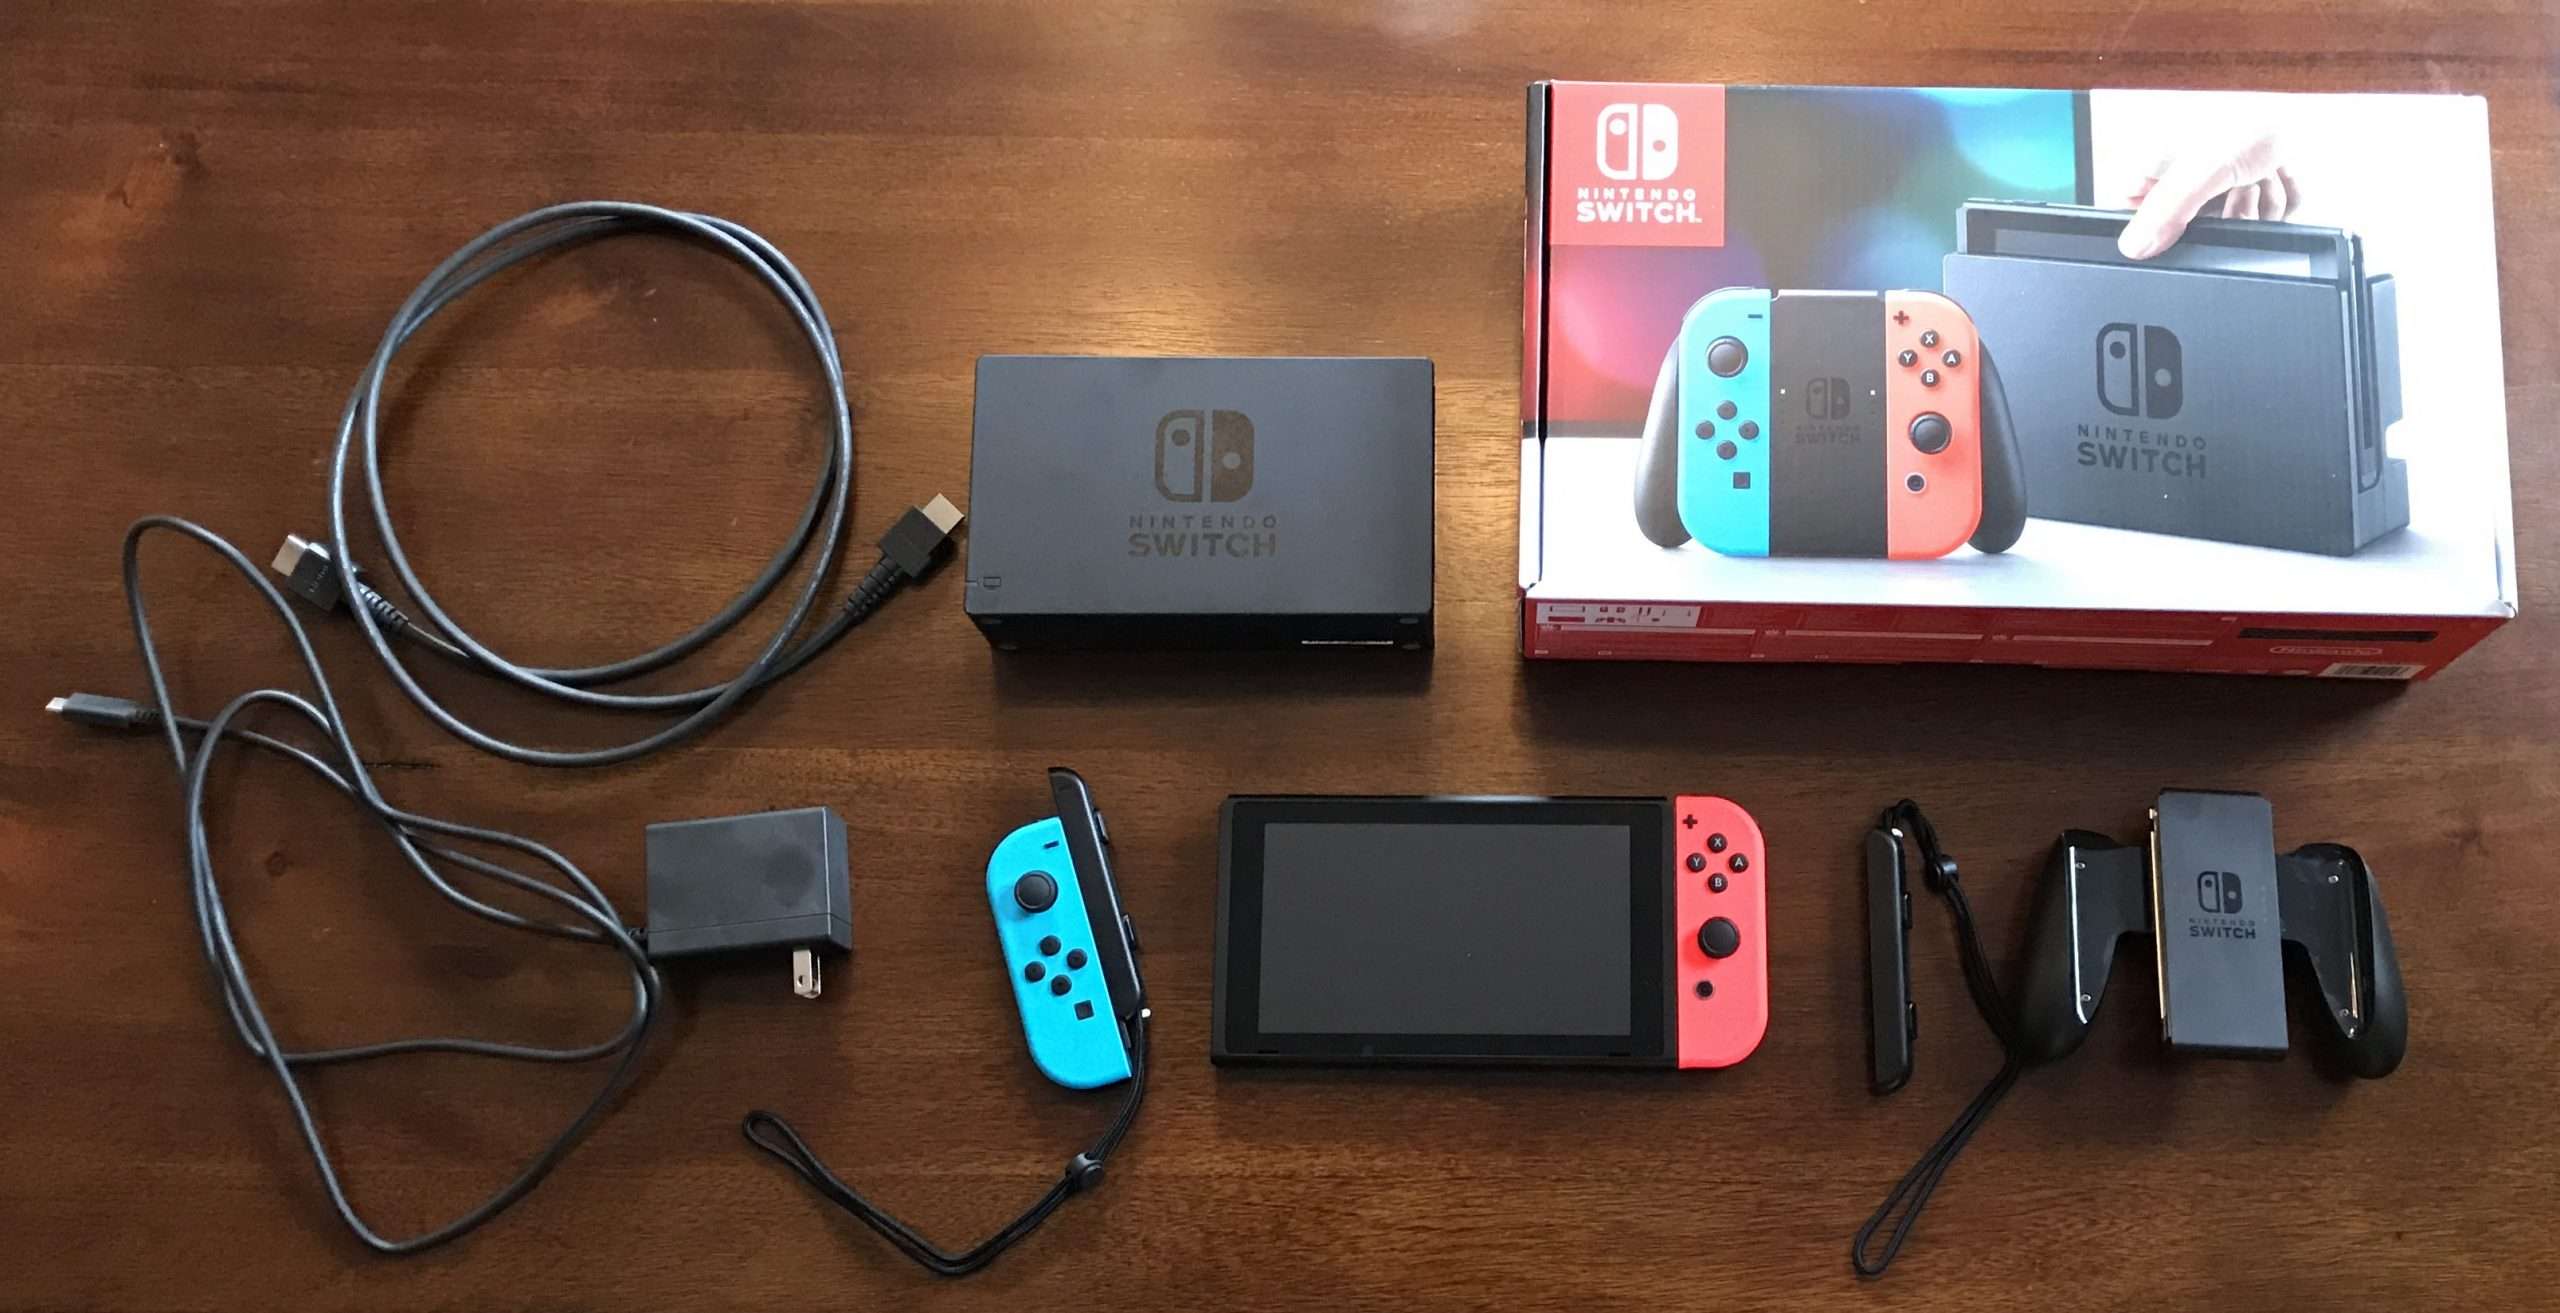  Switch How to connect the Nintendo Switch to a TV without a dock If ...